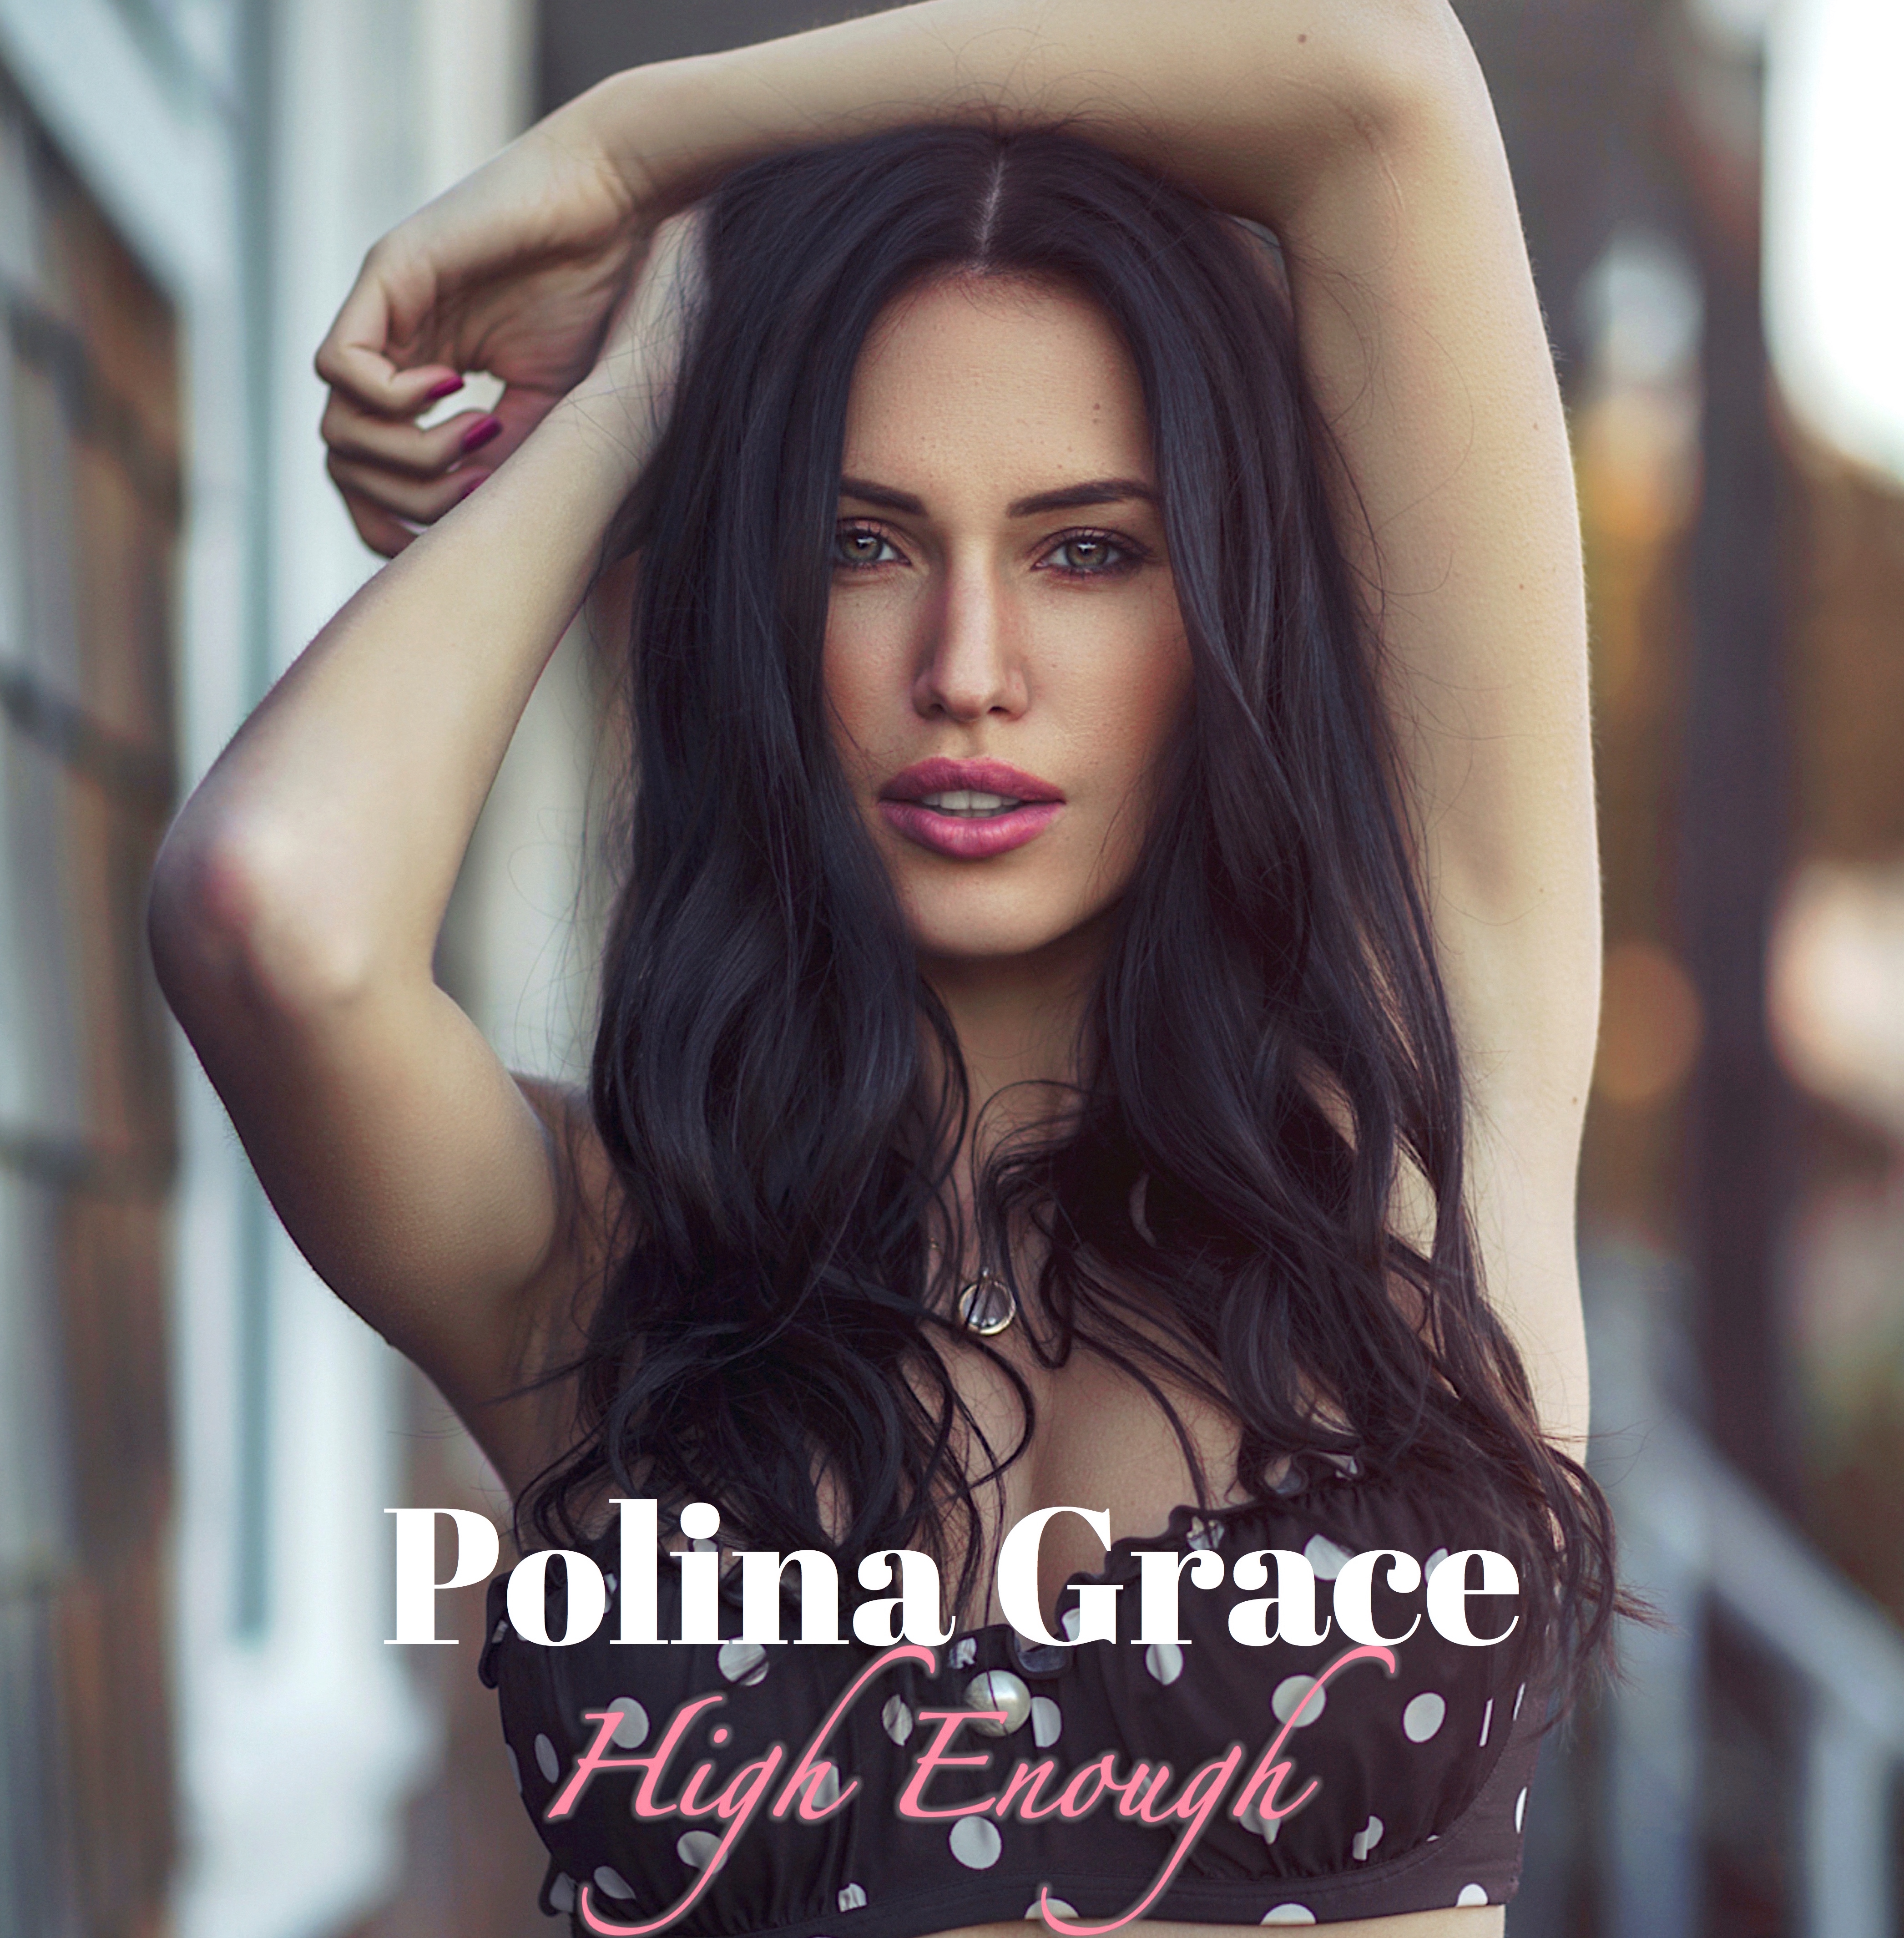 Canadian Model Turned Musician POLINA GRACE Drops Game-Changing New Single ...